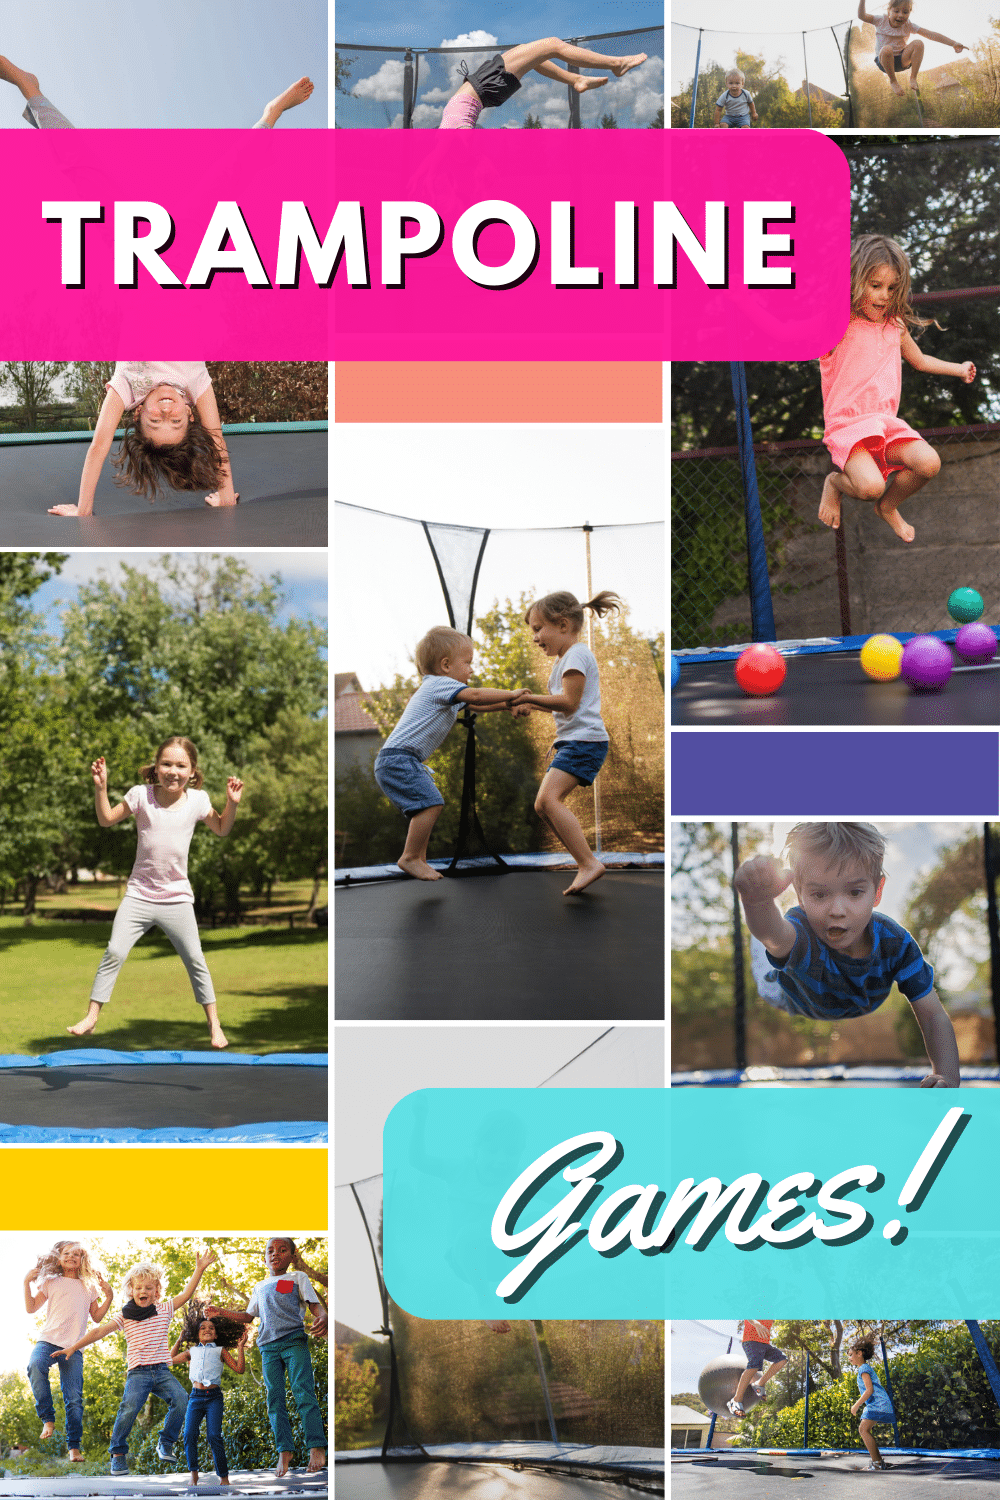 If you're looking for hours of bouncy fun, you're going to love this collection of the 27 best trampoline games you can play with your family. #trampoline #outdooractivities #familyfun #trampolinegames via @wondermomwannab